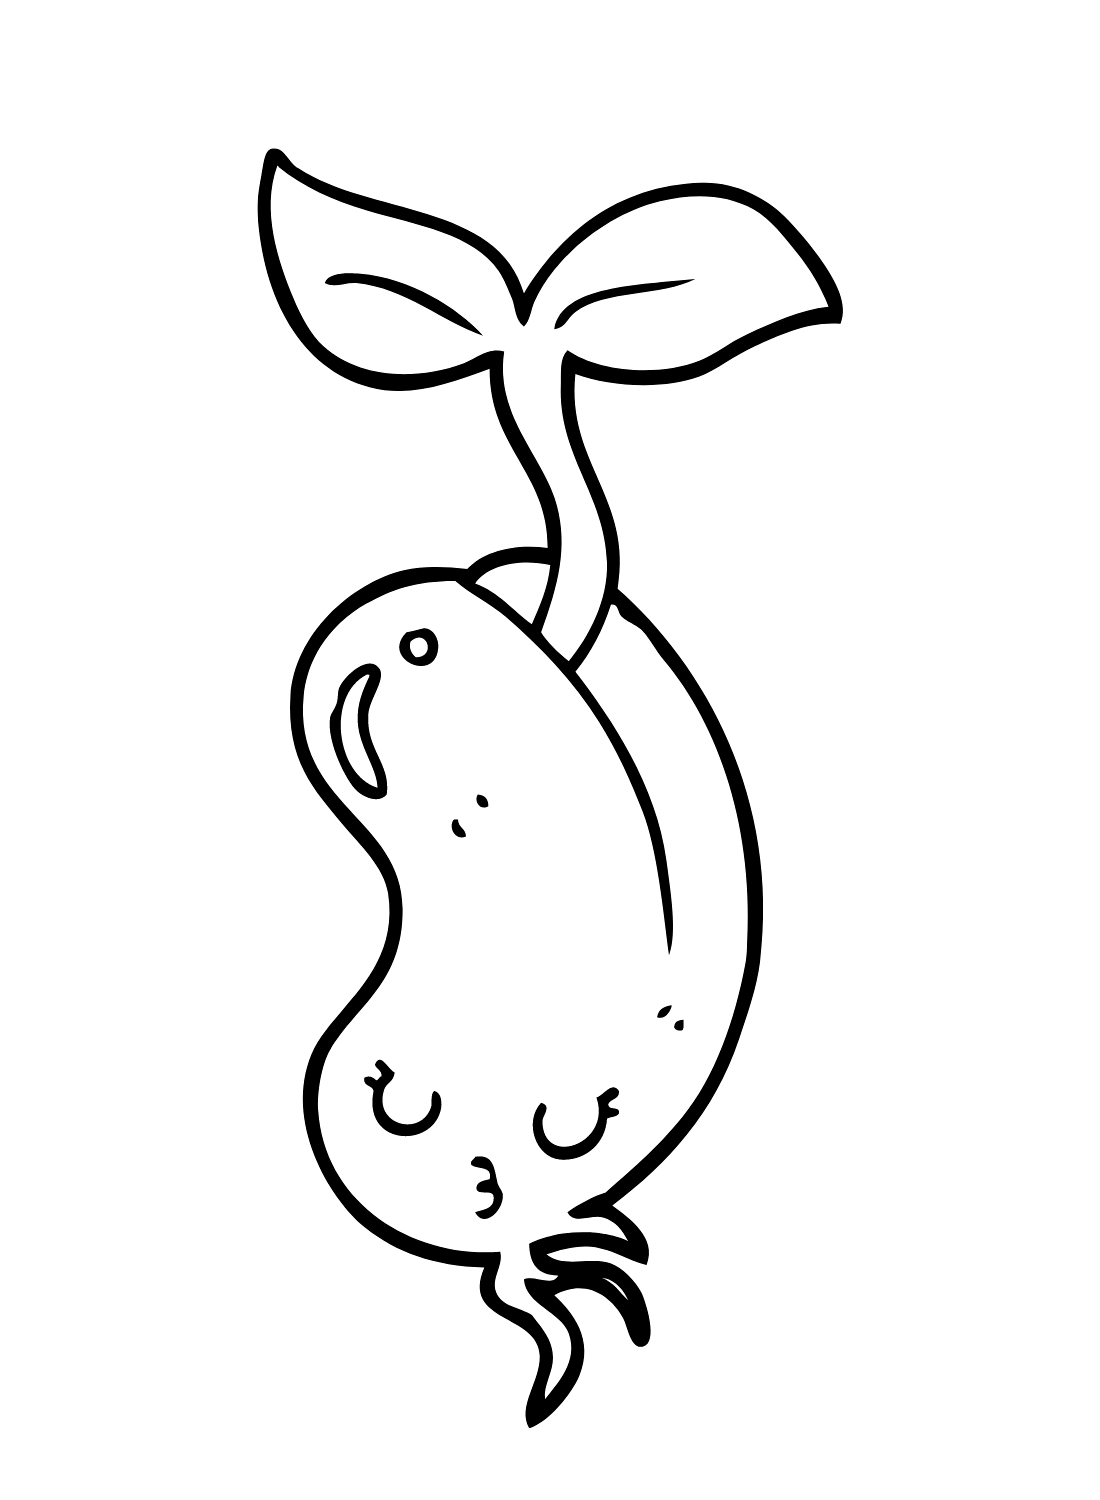 Sprouting Bean Coloring Page